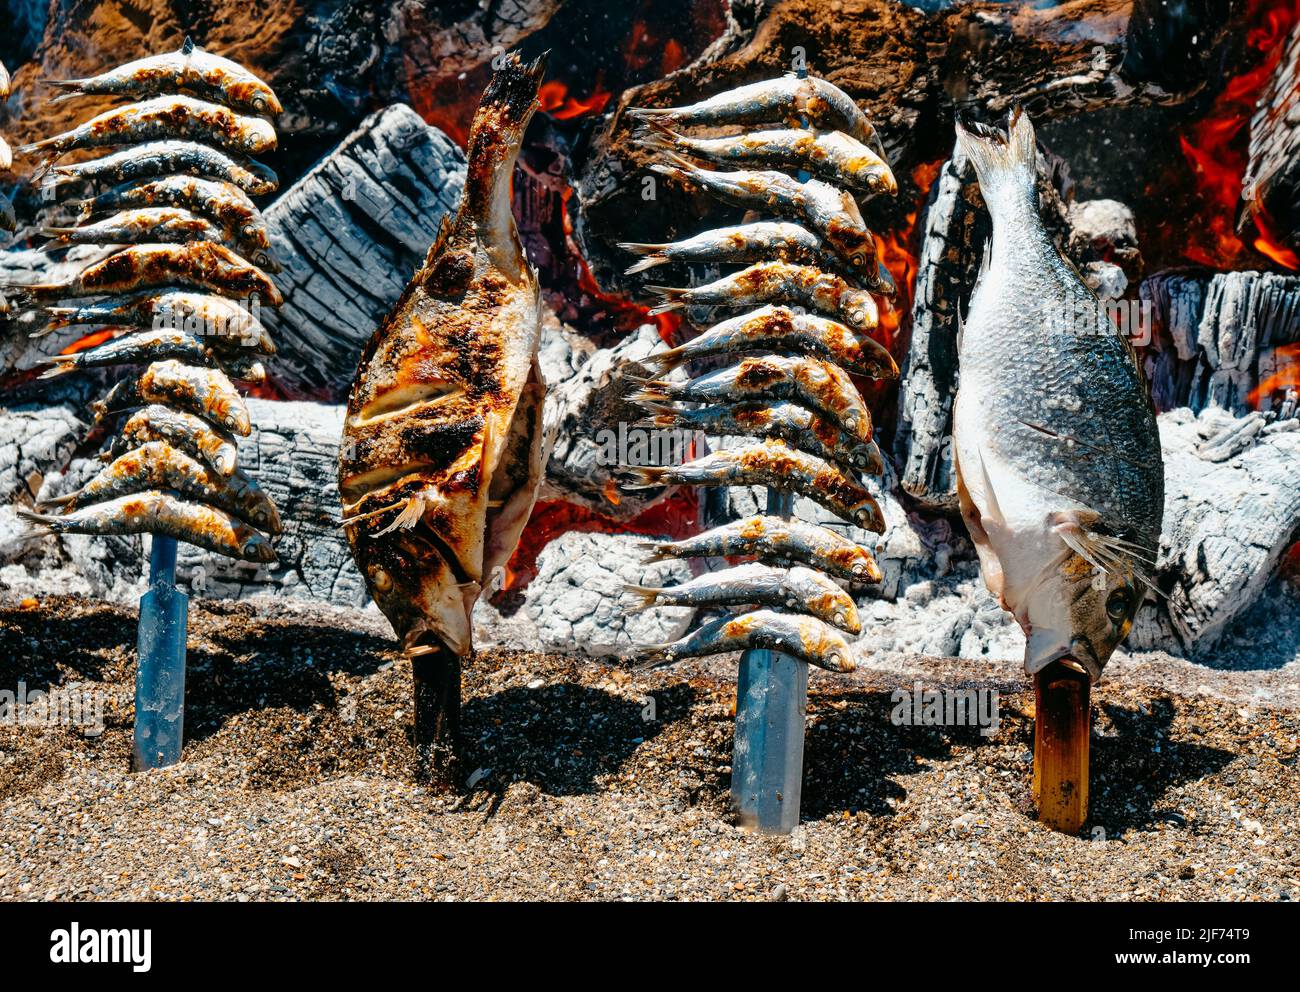 some different espetos, skewers where fish is skewered, being cooked over a wood fire as its traditional in the Malagueta beach in Malaga, Spain Stock Photo